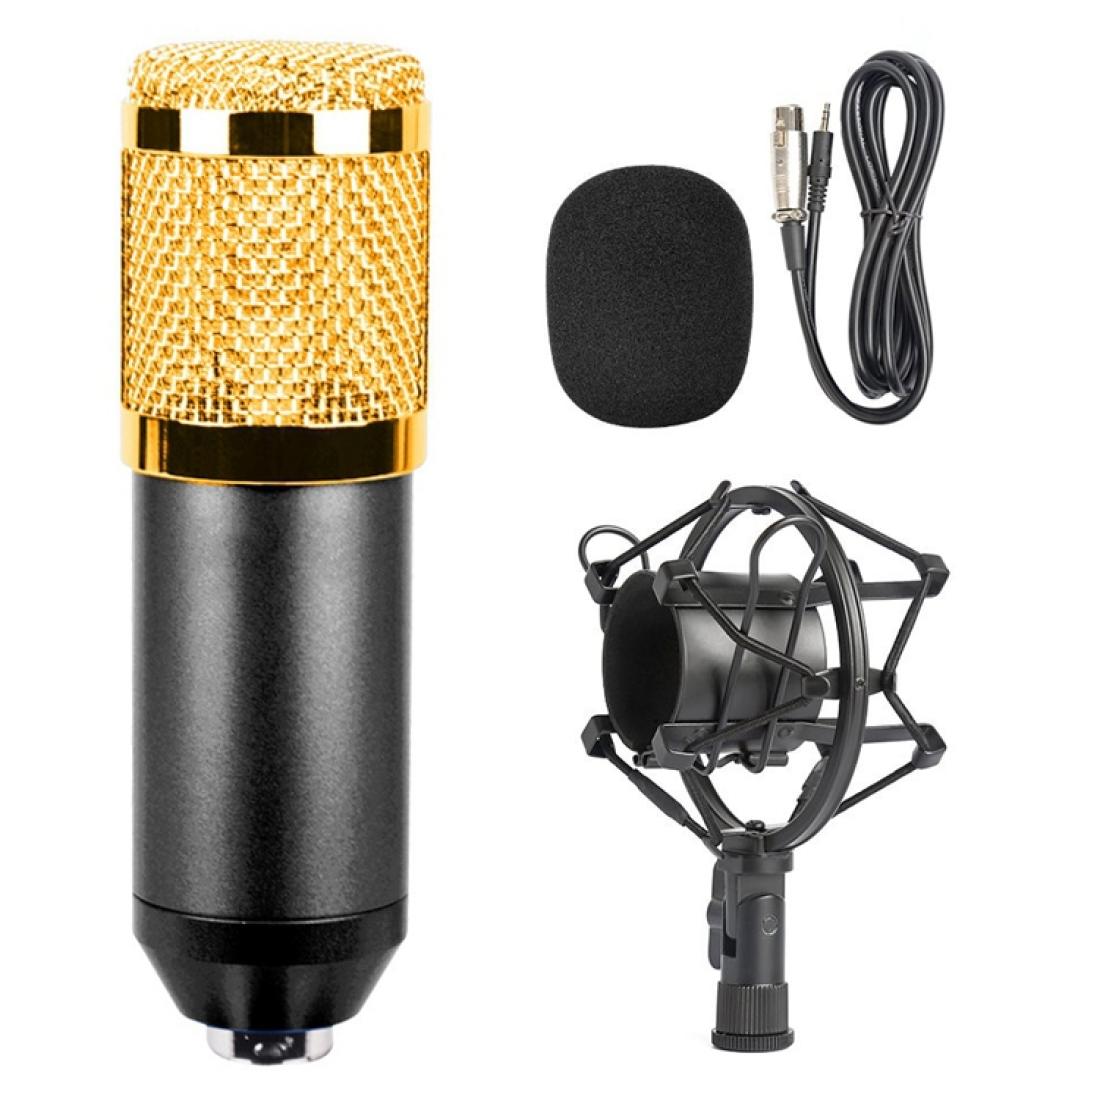 

BM-800 35mm Studio Recording Wired Condenser Sound Microphone with Shock Mount Compatible with PC Mac for Live Broadcast Show KTV etc